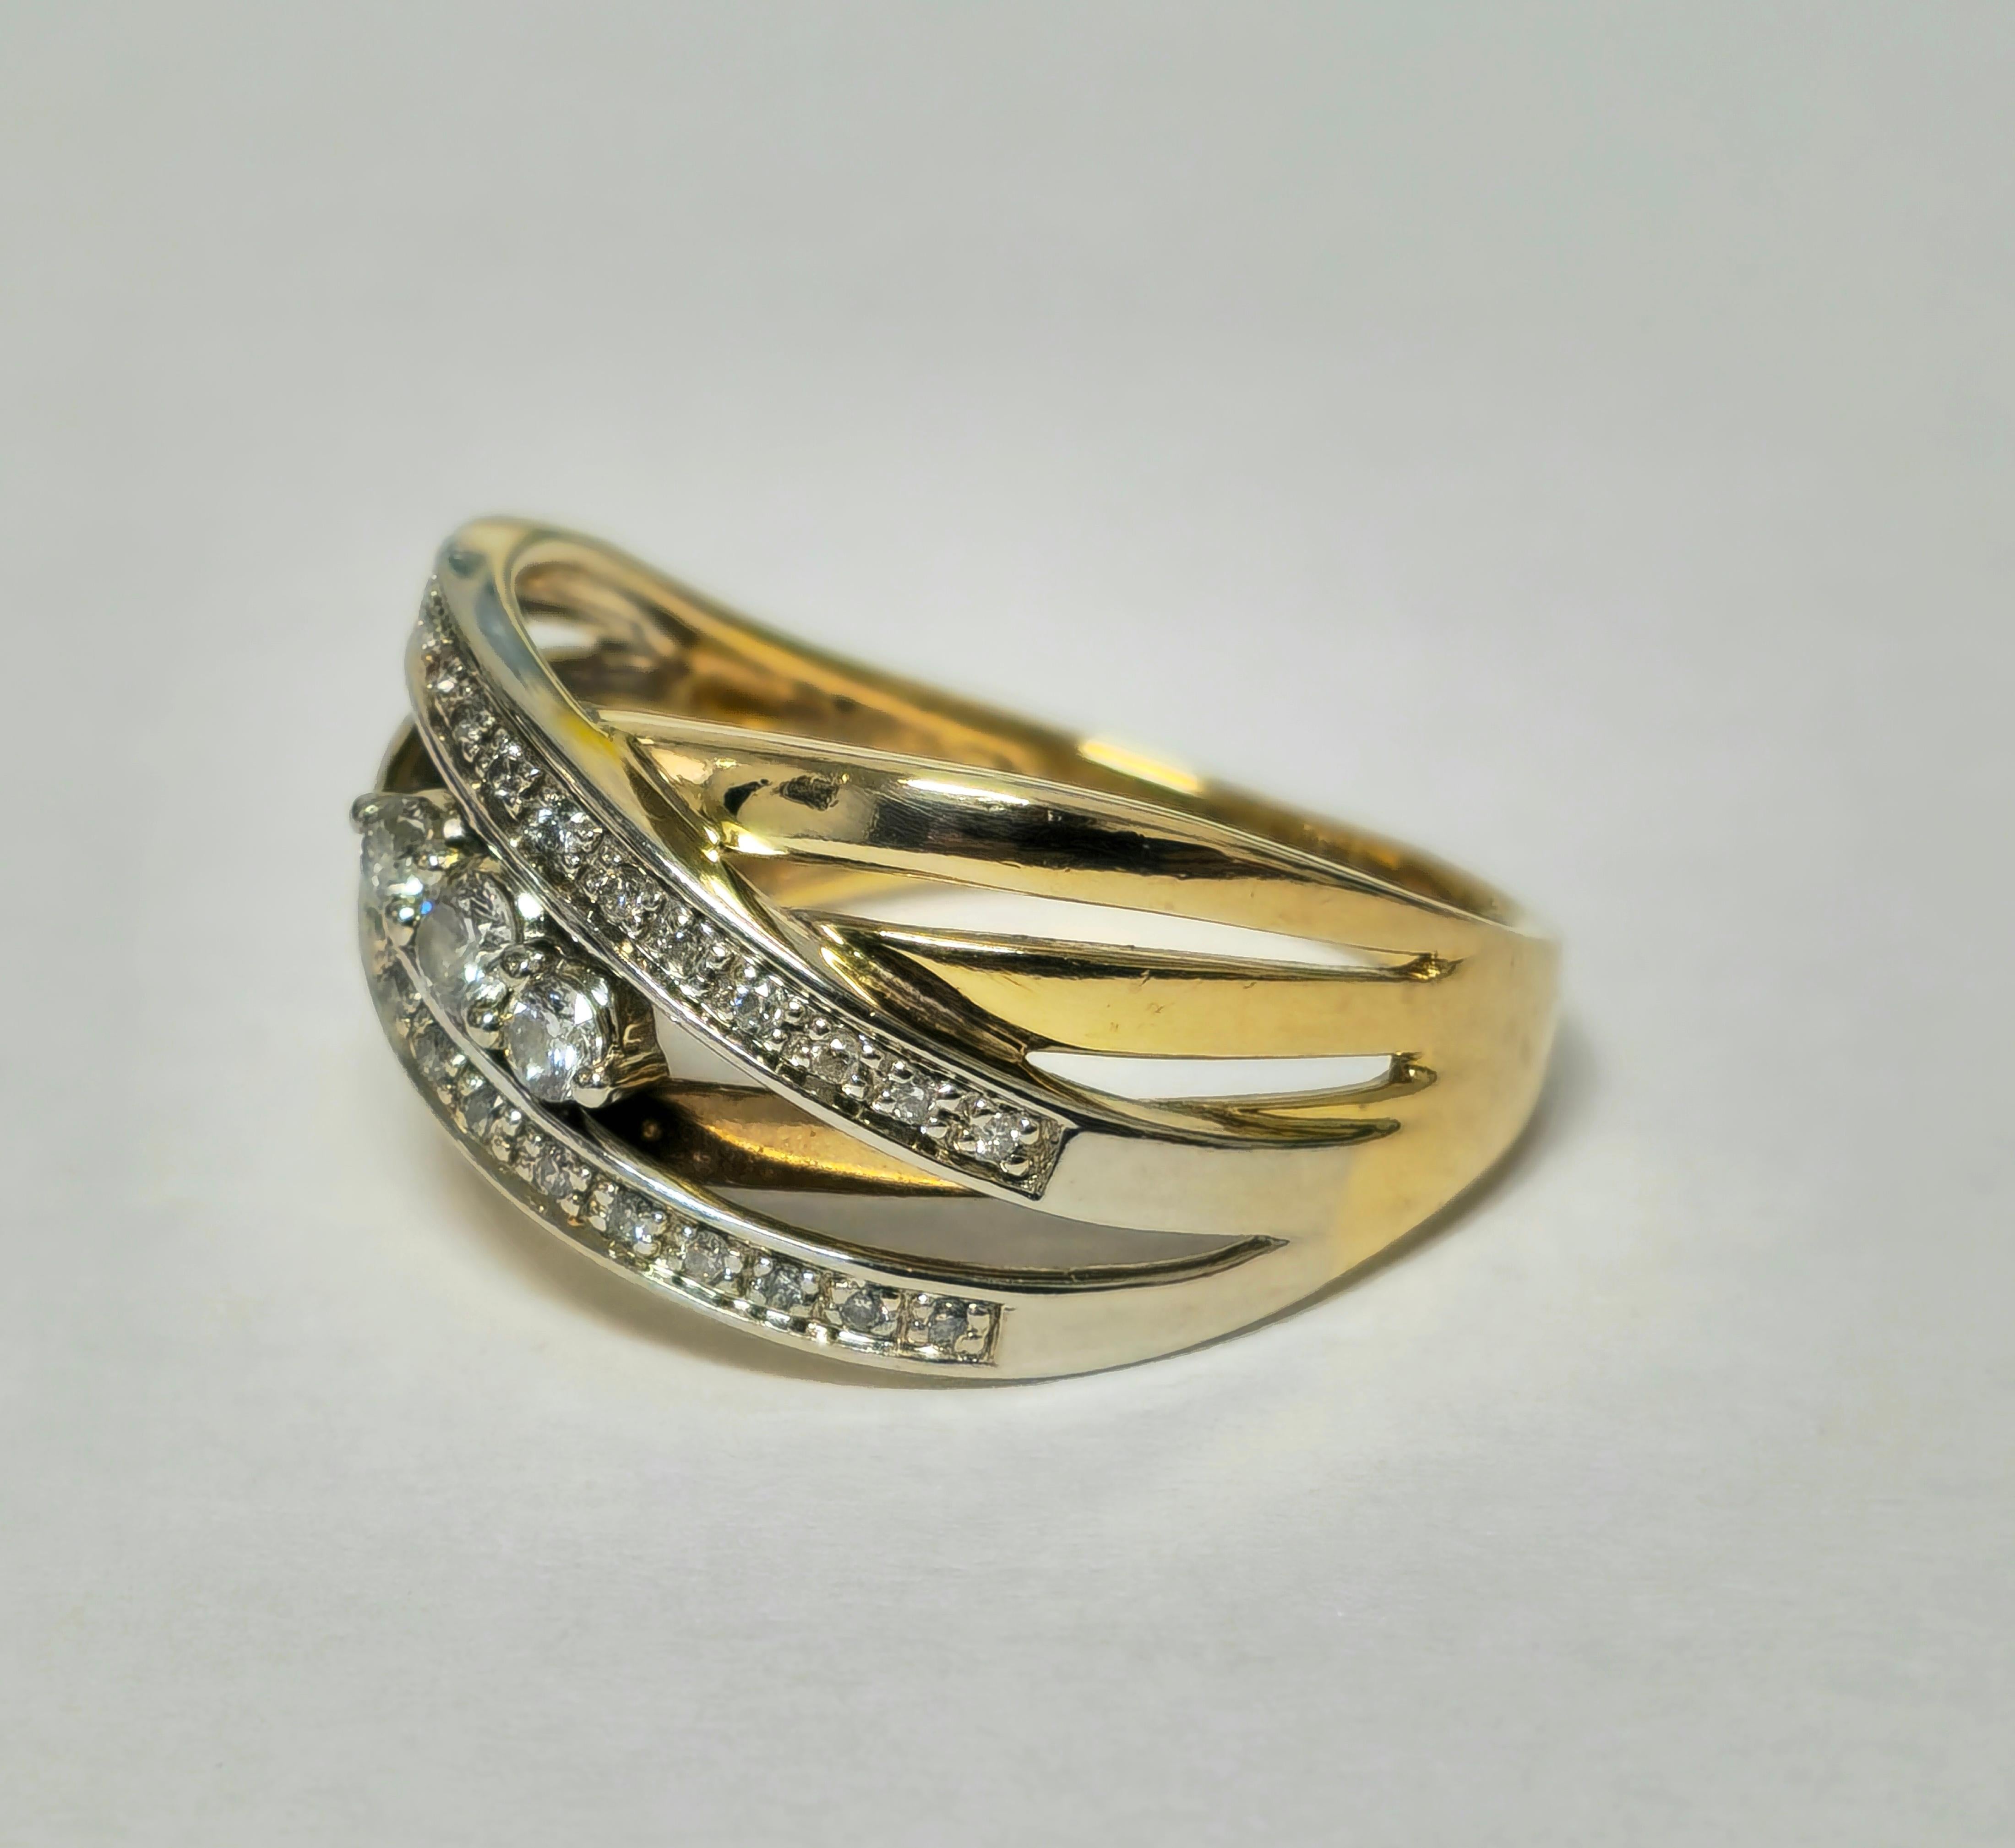 Crafted from 10k yellow and white gold, this vintage diamond wedding band features a total of 0.40 carats of round-cut diamonds, exhibiting SI2 clarity and F-G color. Weighing 4.50 grams, it offers a comfortable fit for US size 7.75, with